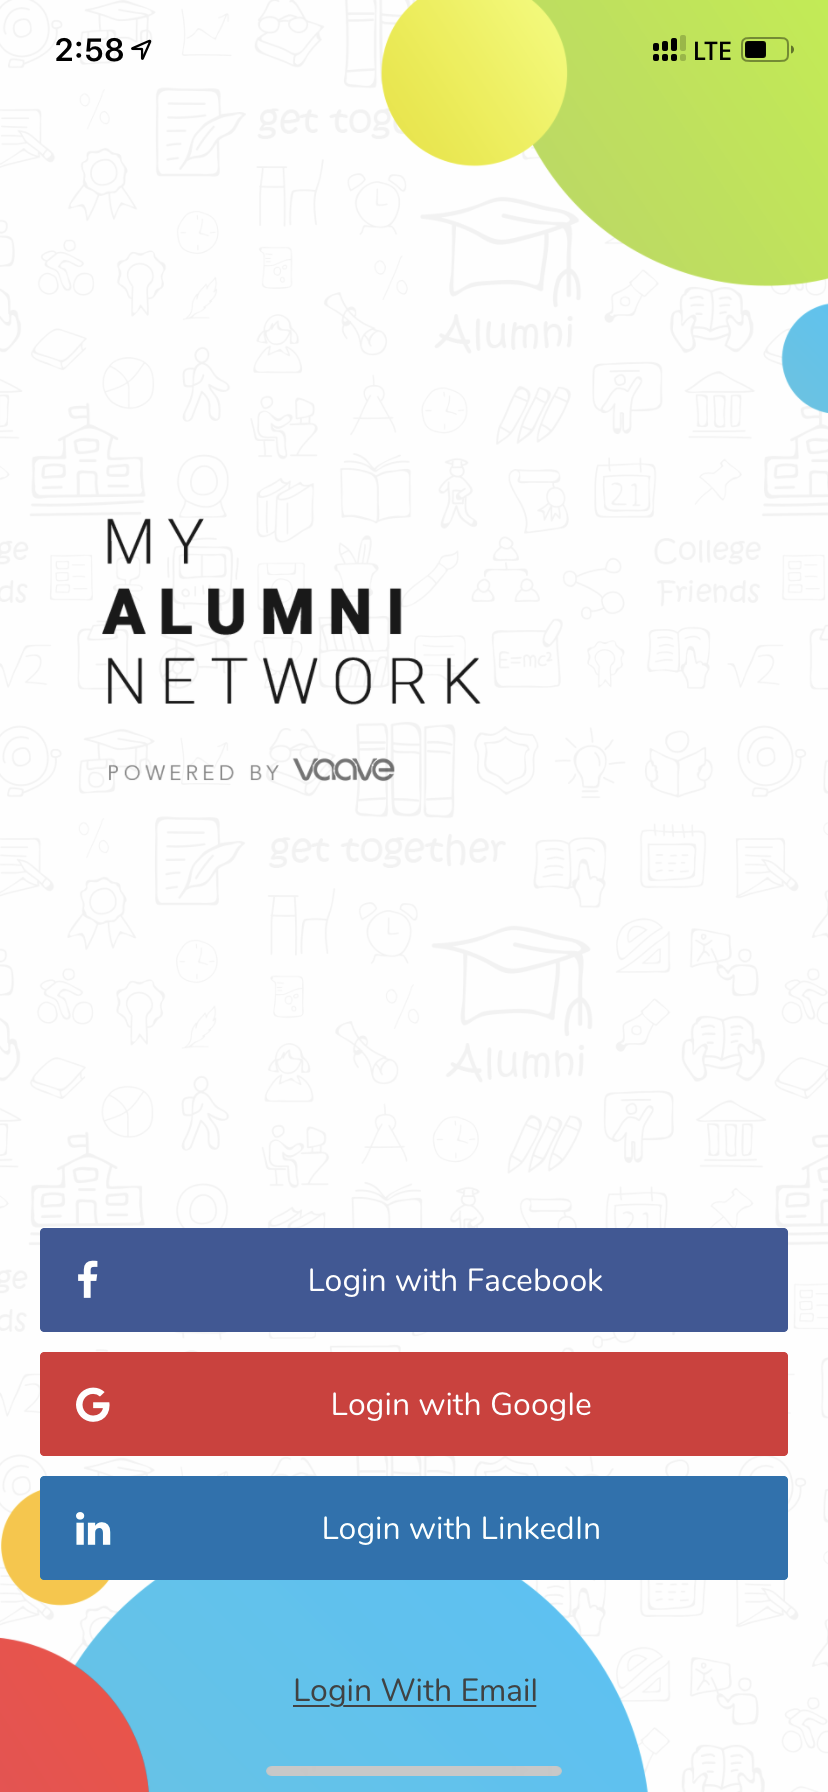 Vaave Software - My Alumni Network mobile app available in both Android & iOS -  Registered users can sign using Facebook , LinkedIn , Google or with email